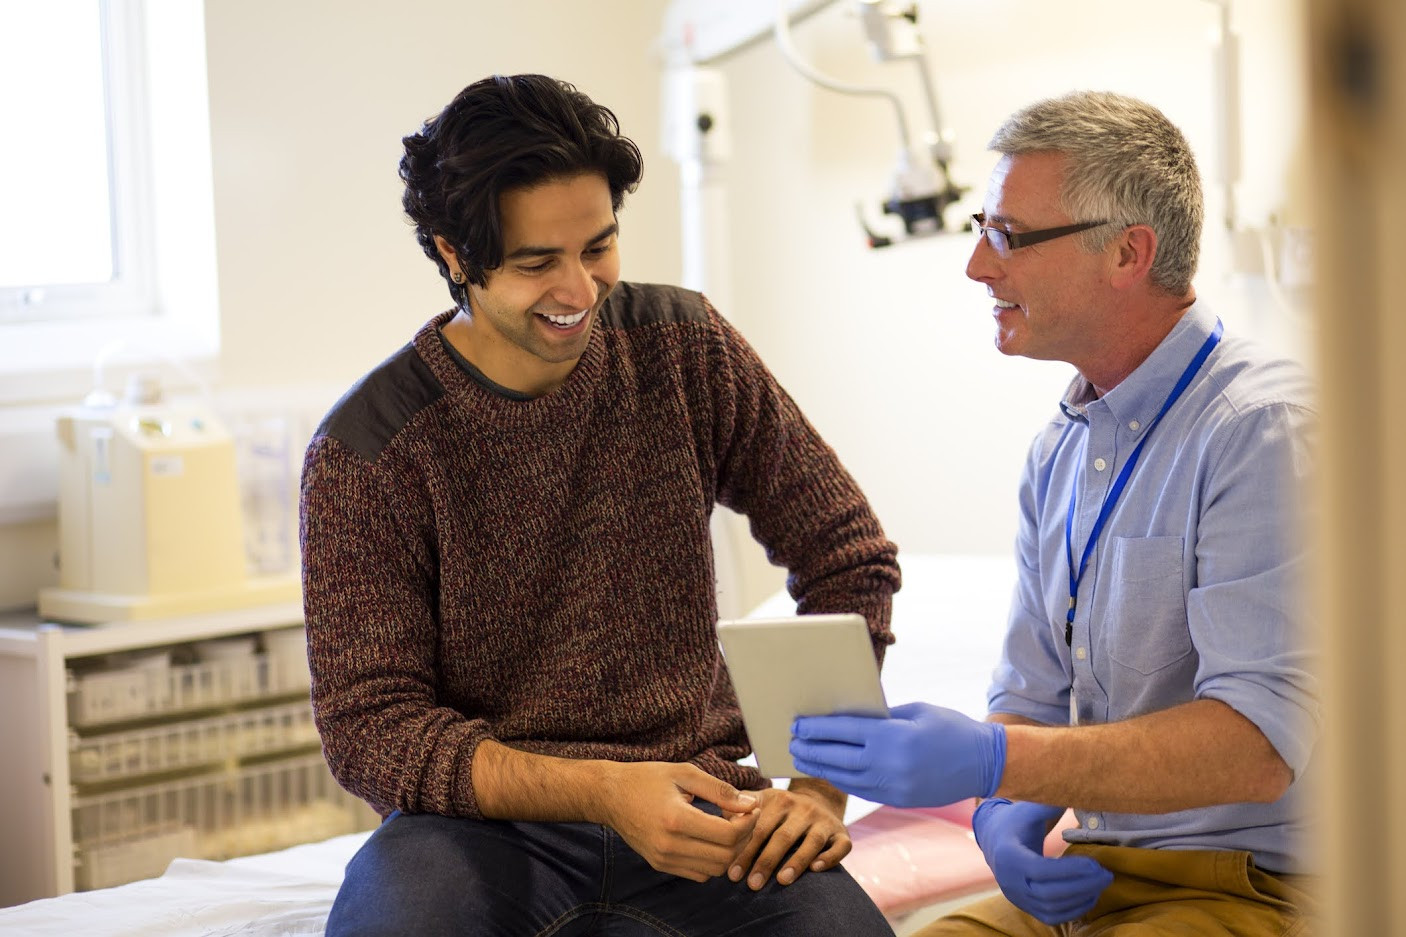 Male doctor and patient talking and smiling.